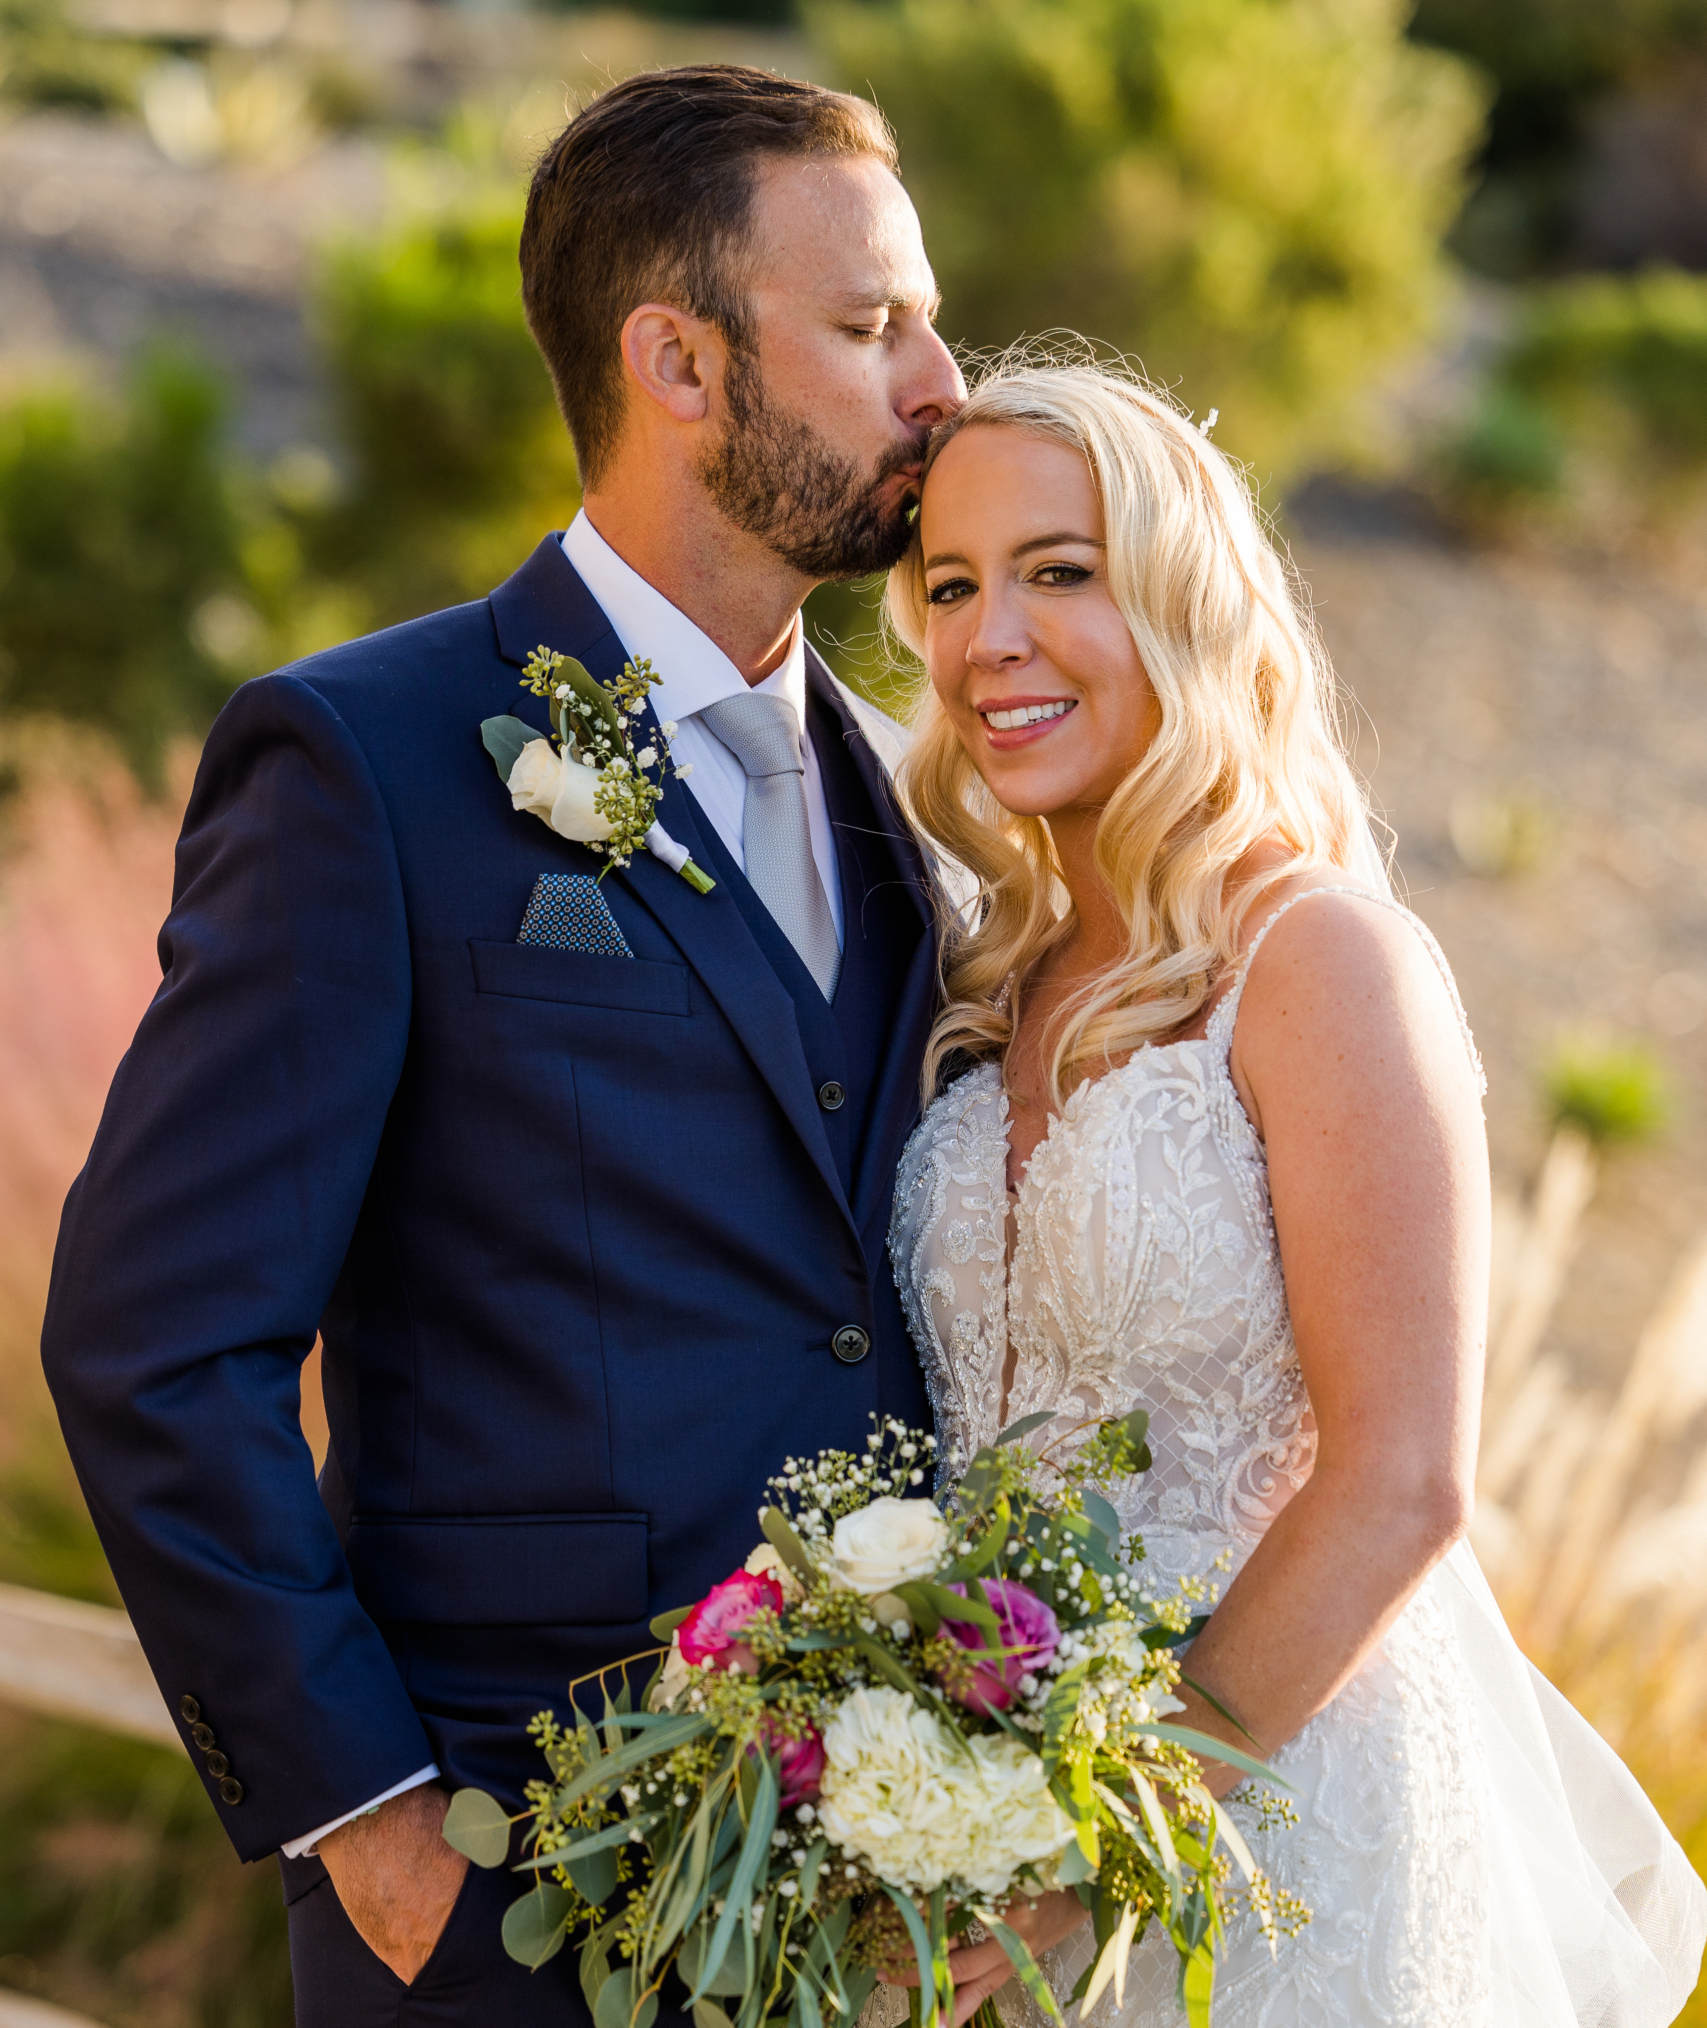 Real wedding couple at The Crossings Carlsbad captured by Carlsbad Photo Best Carlsbad Wedding Photographer